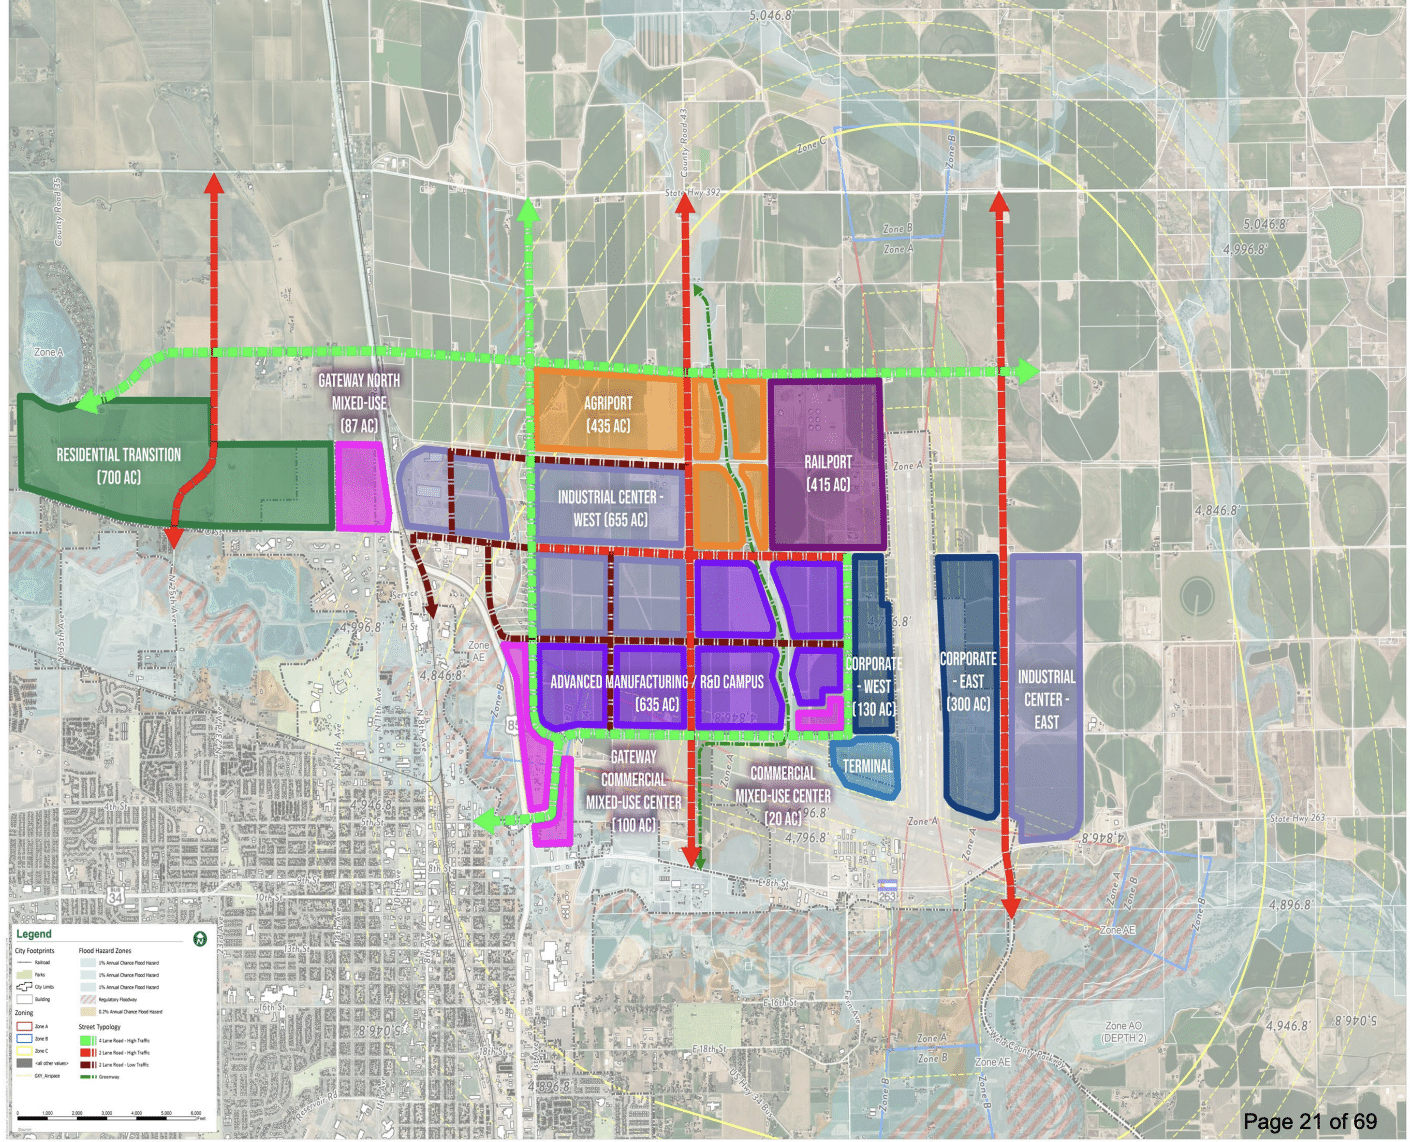 20-year strategic plan mapped out for Greeley-Weld County Airport.